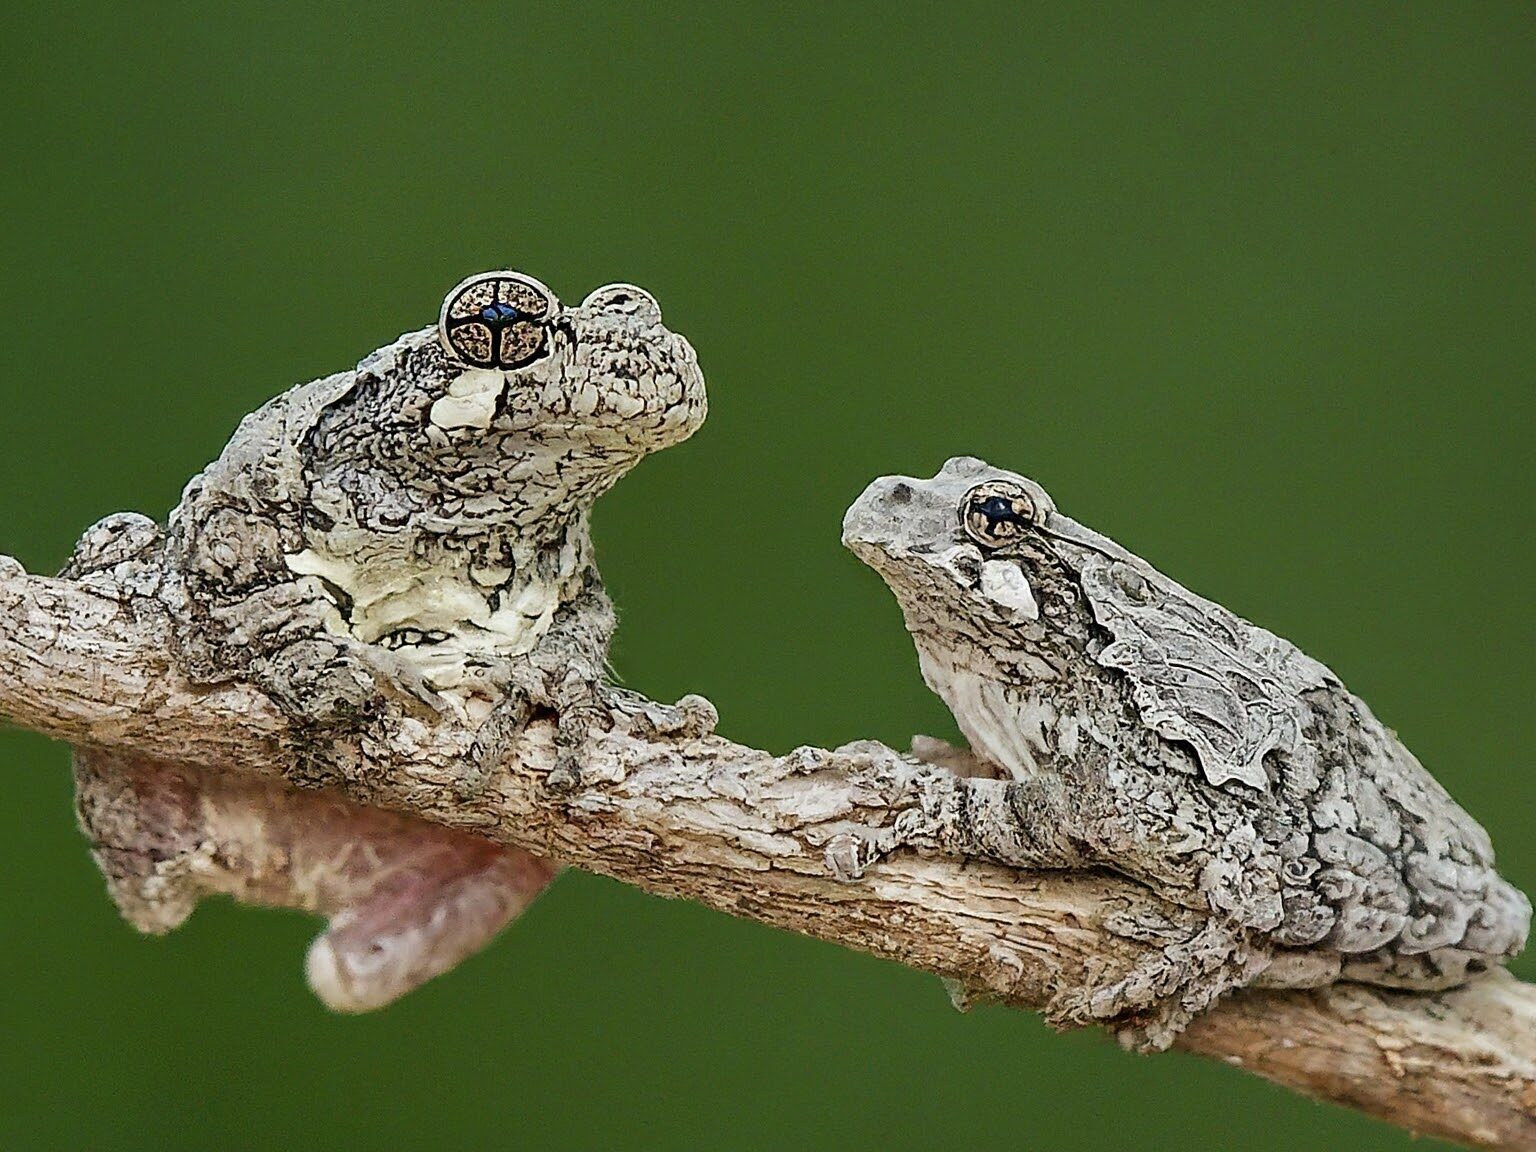 Eastern Gray Treefrog and Cope's Gray Treefrog comparison highlighting size and skin texture differences.